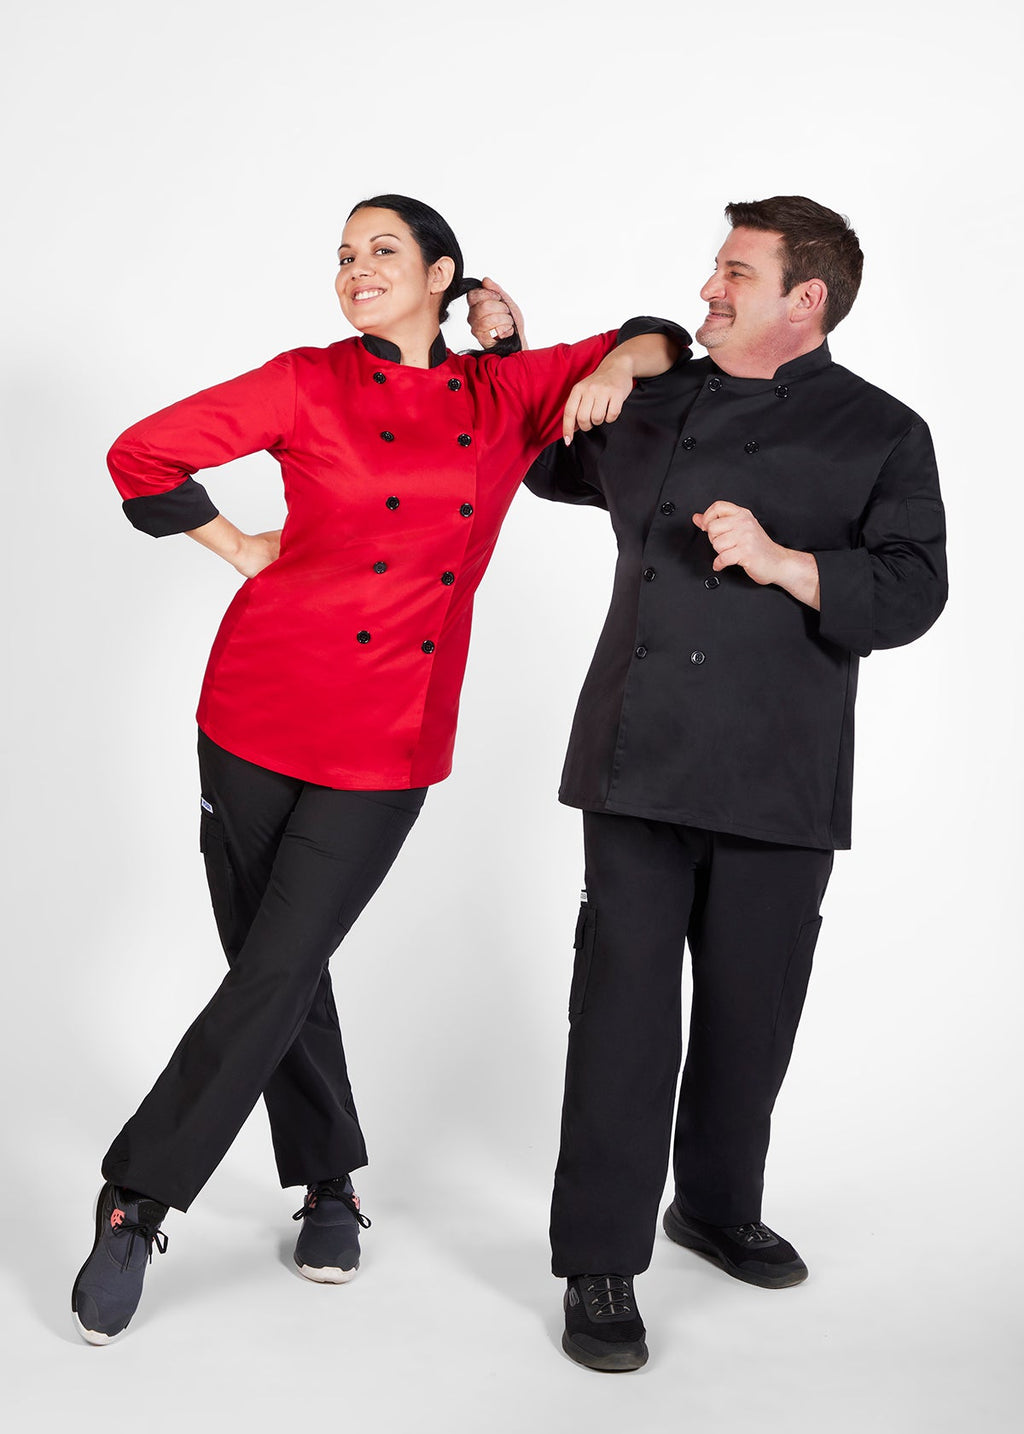 Product - MOBB Clearance Unisex Classic Chef Coat